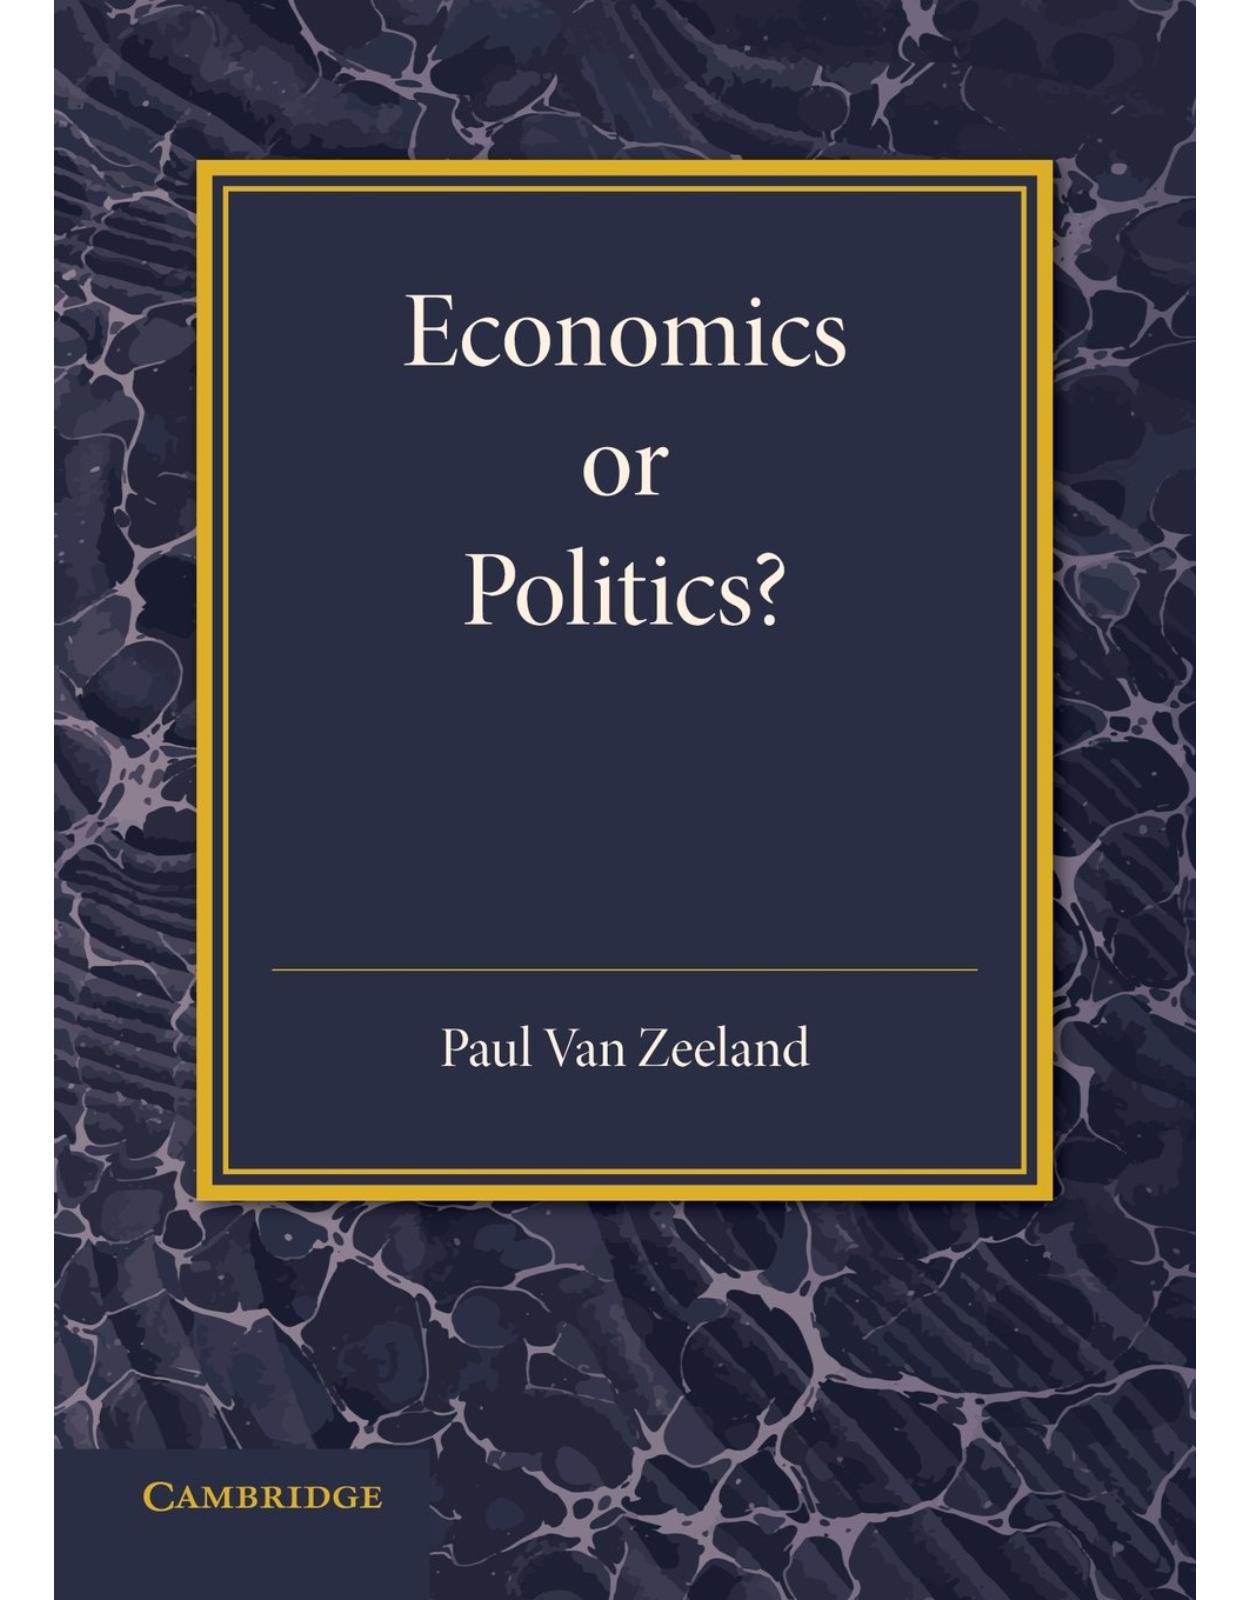 Economics or Politics?: A Lecture on the Present Problems of International Relations